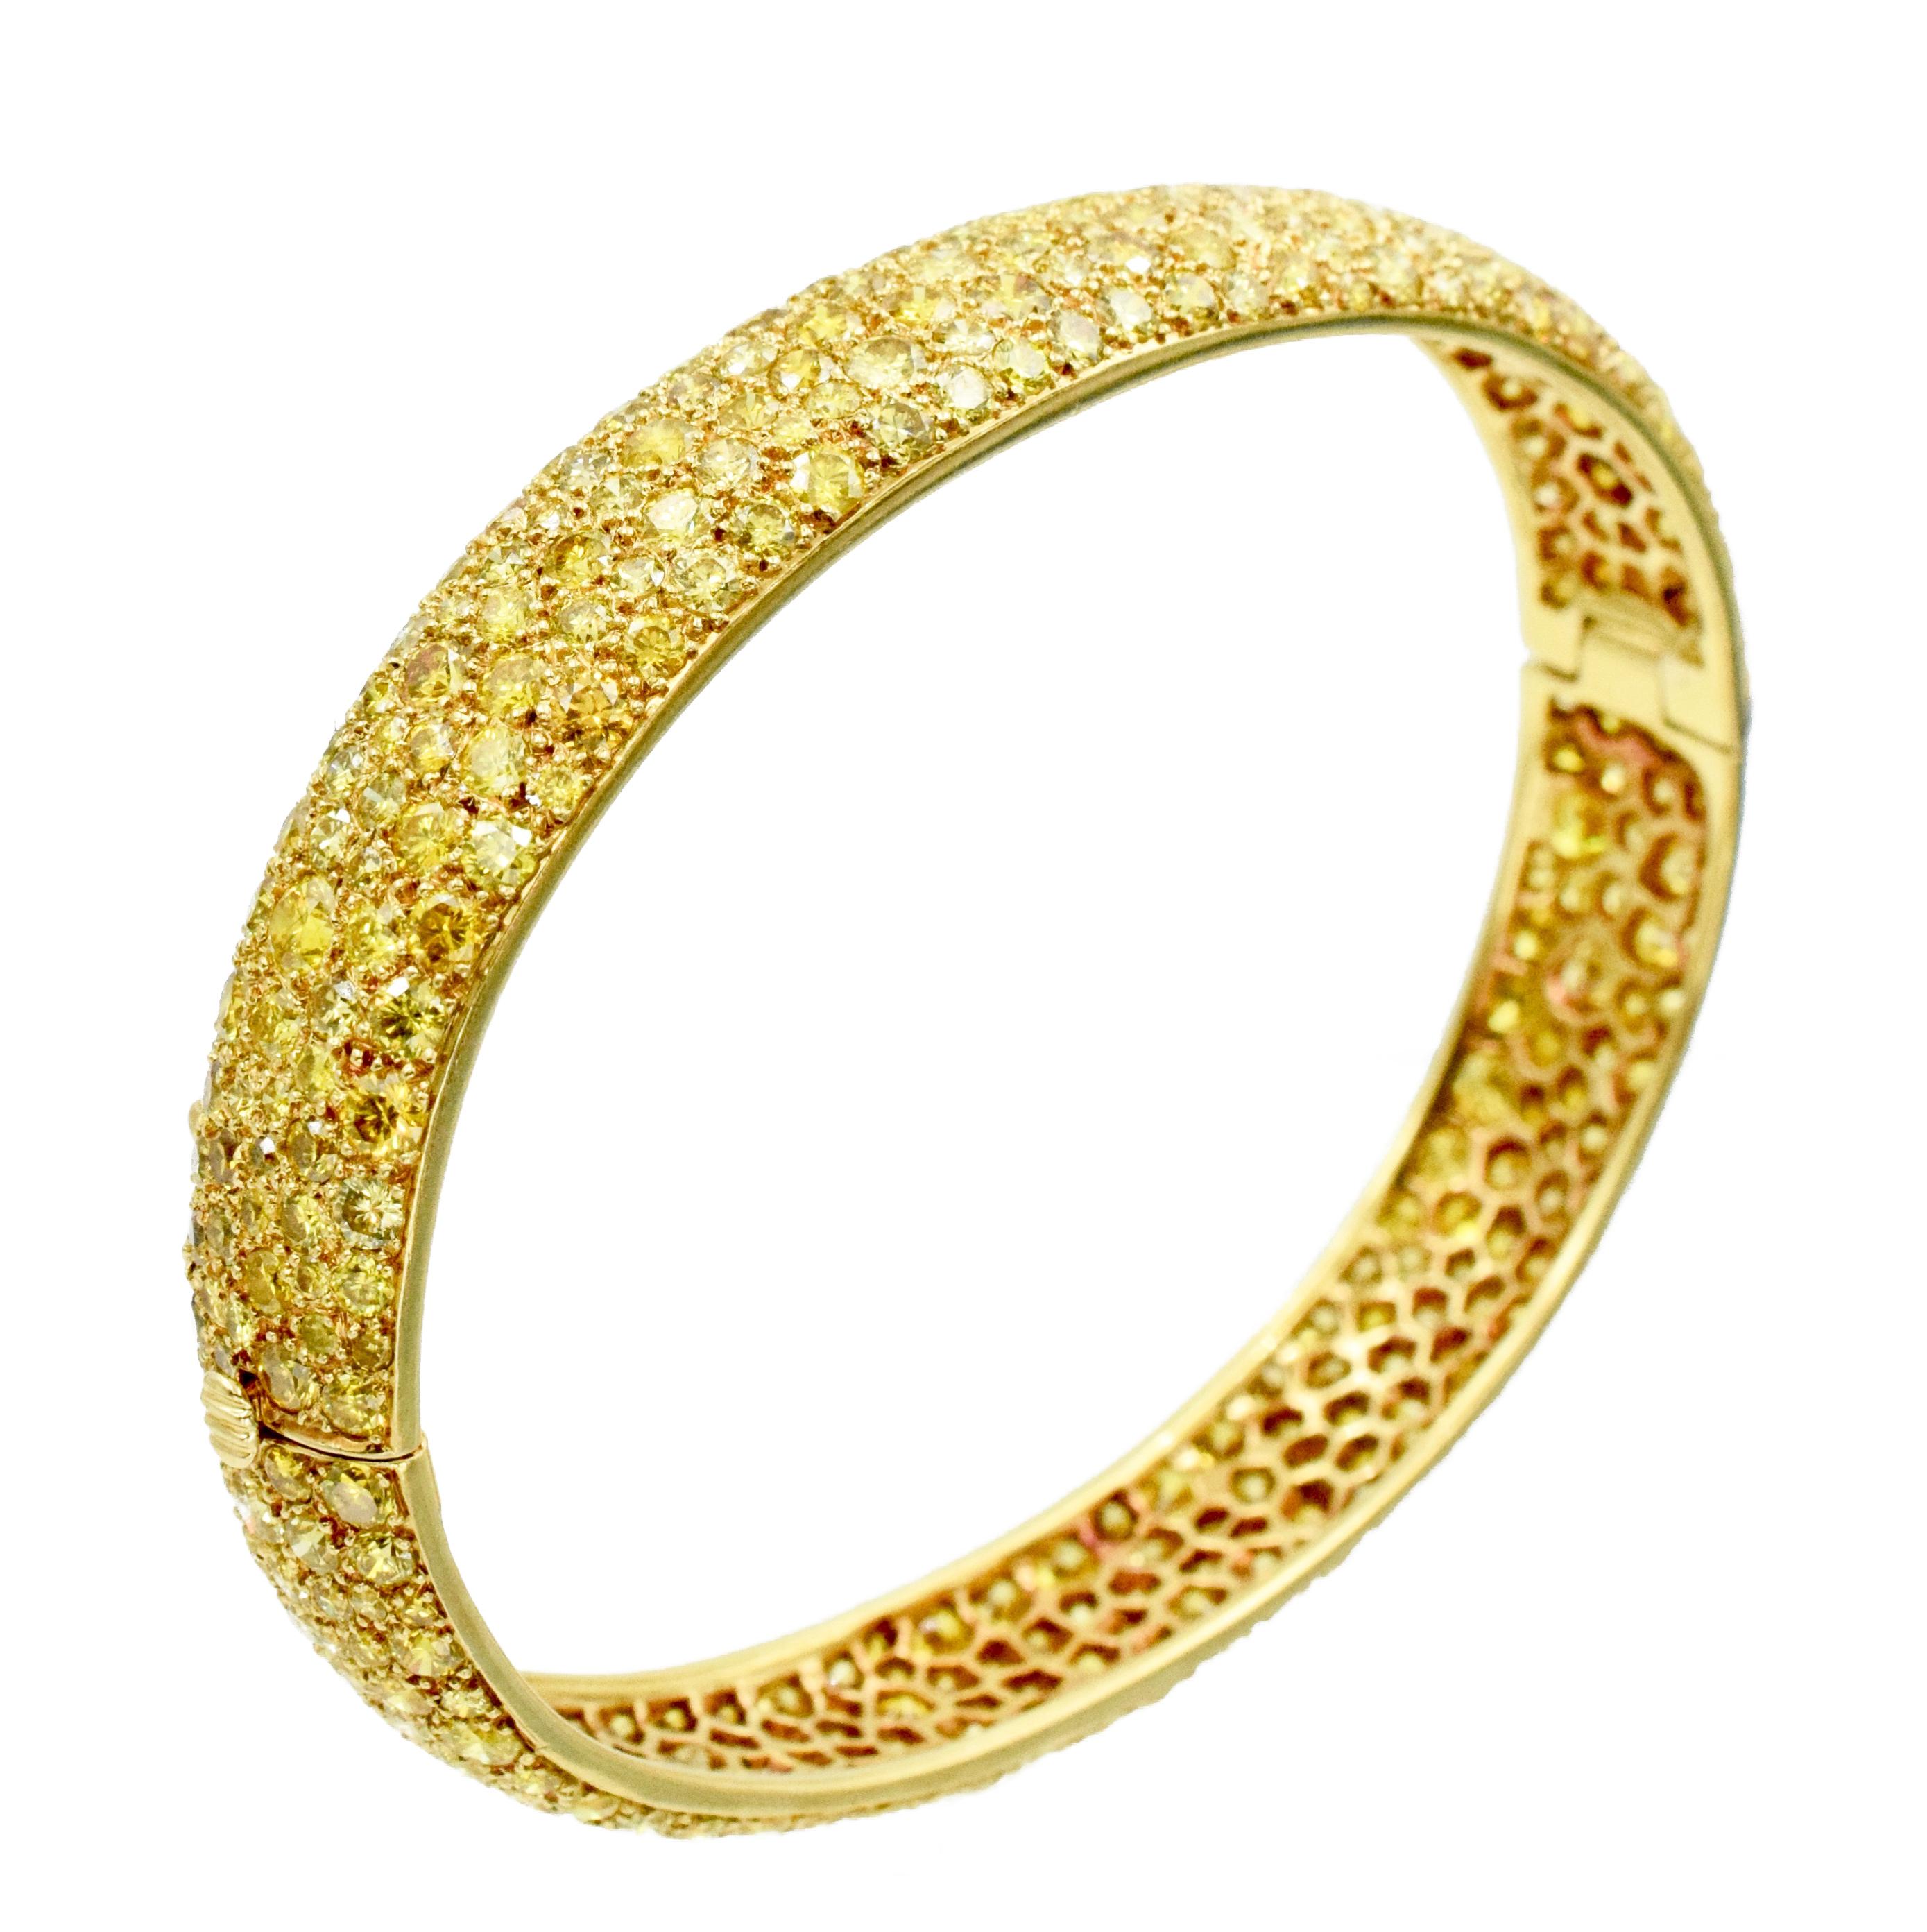 Impressive, Van Cleef and Arpels Yellow diamond bangle bracelet in 18k yellow gold. 
The bracelet is pave set with approximately 12.00c carats of yellow round brilliant cut diamonds.
Signed: Van Cleef & Arpels. Numbered: xxxxx. 
Stamped with French